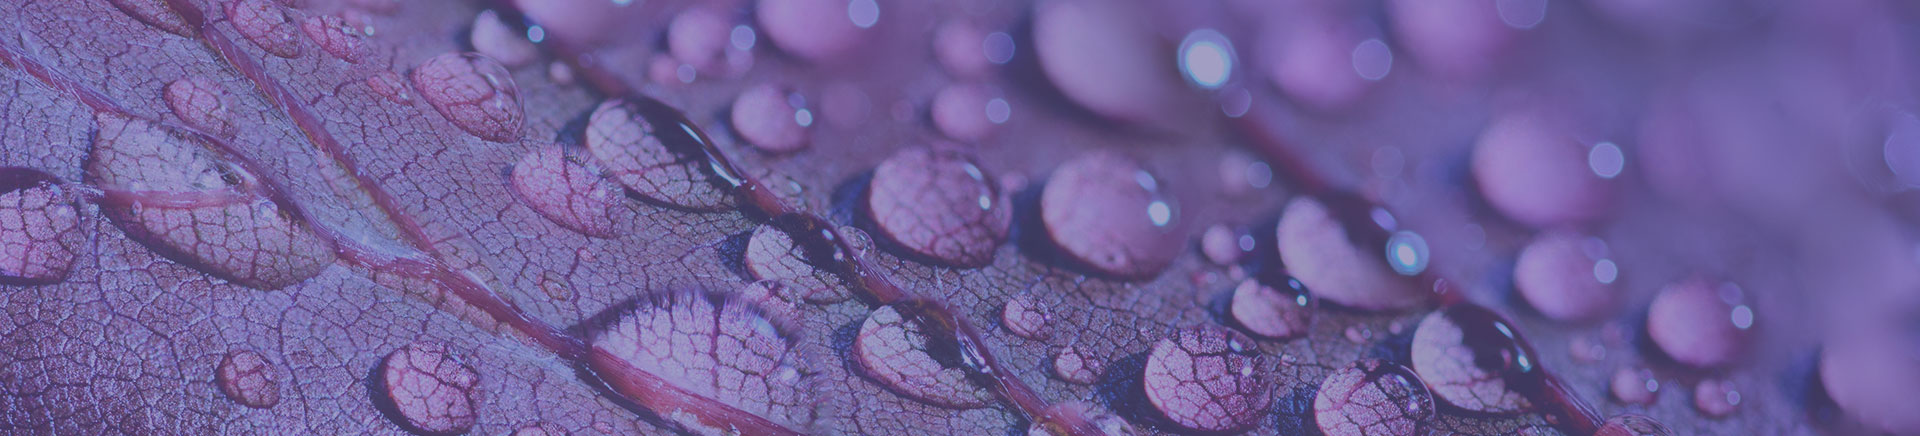 close up of water droplets on a leaf with a purple color overlay